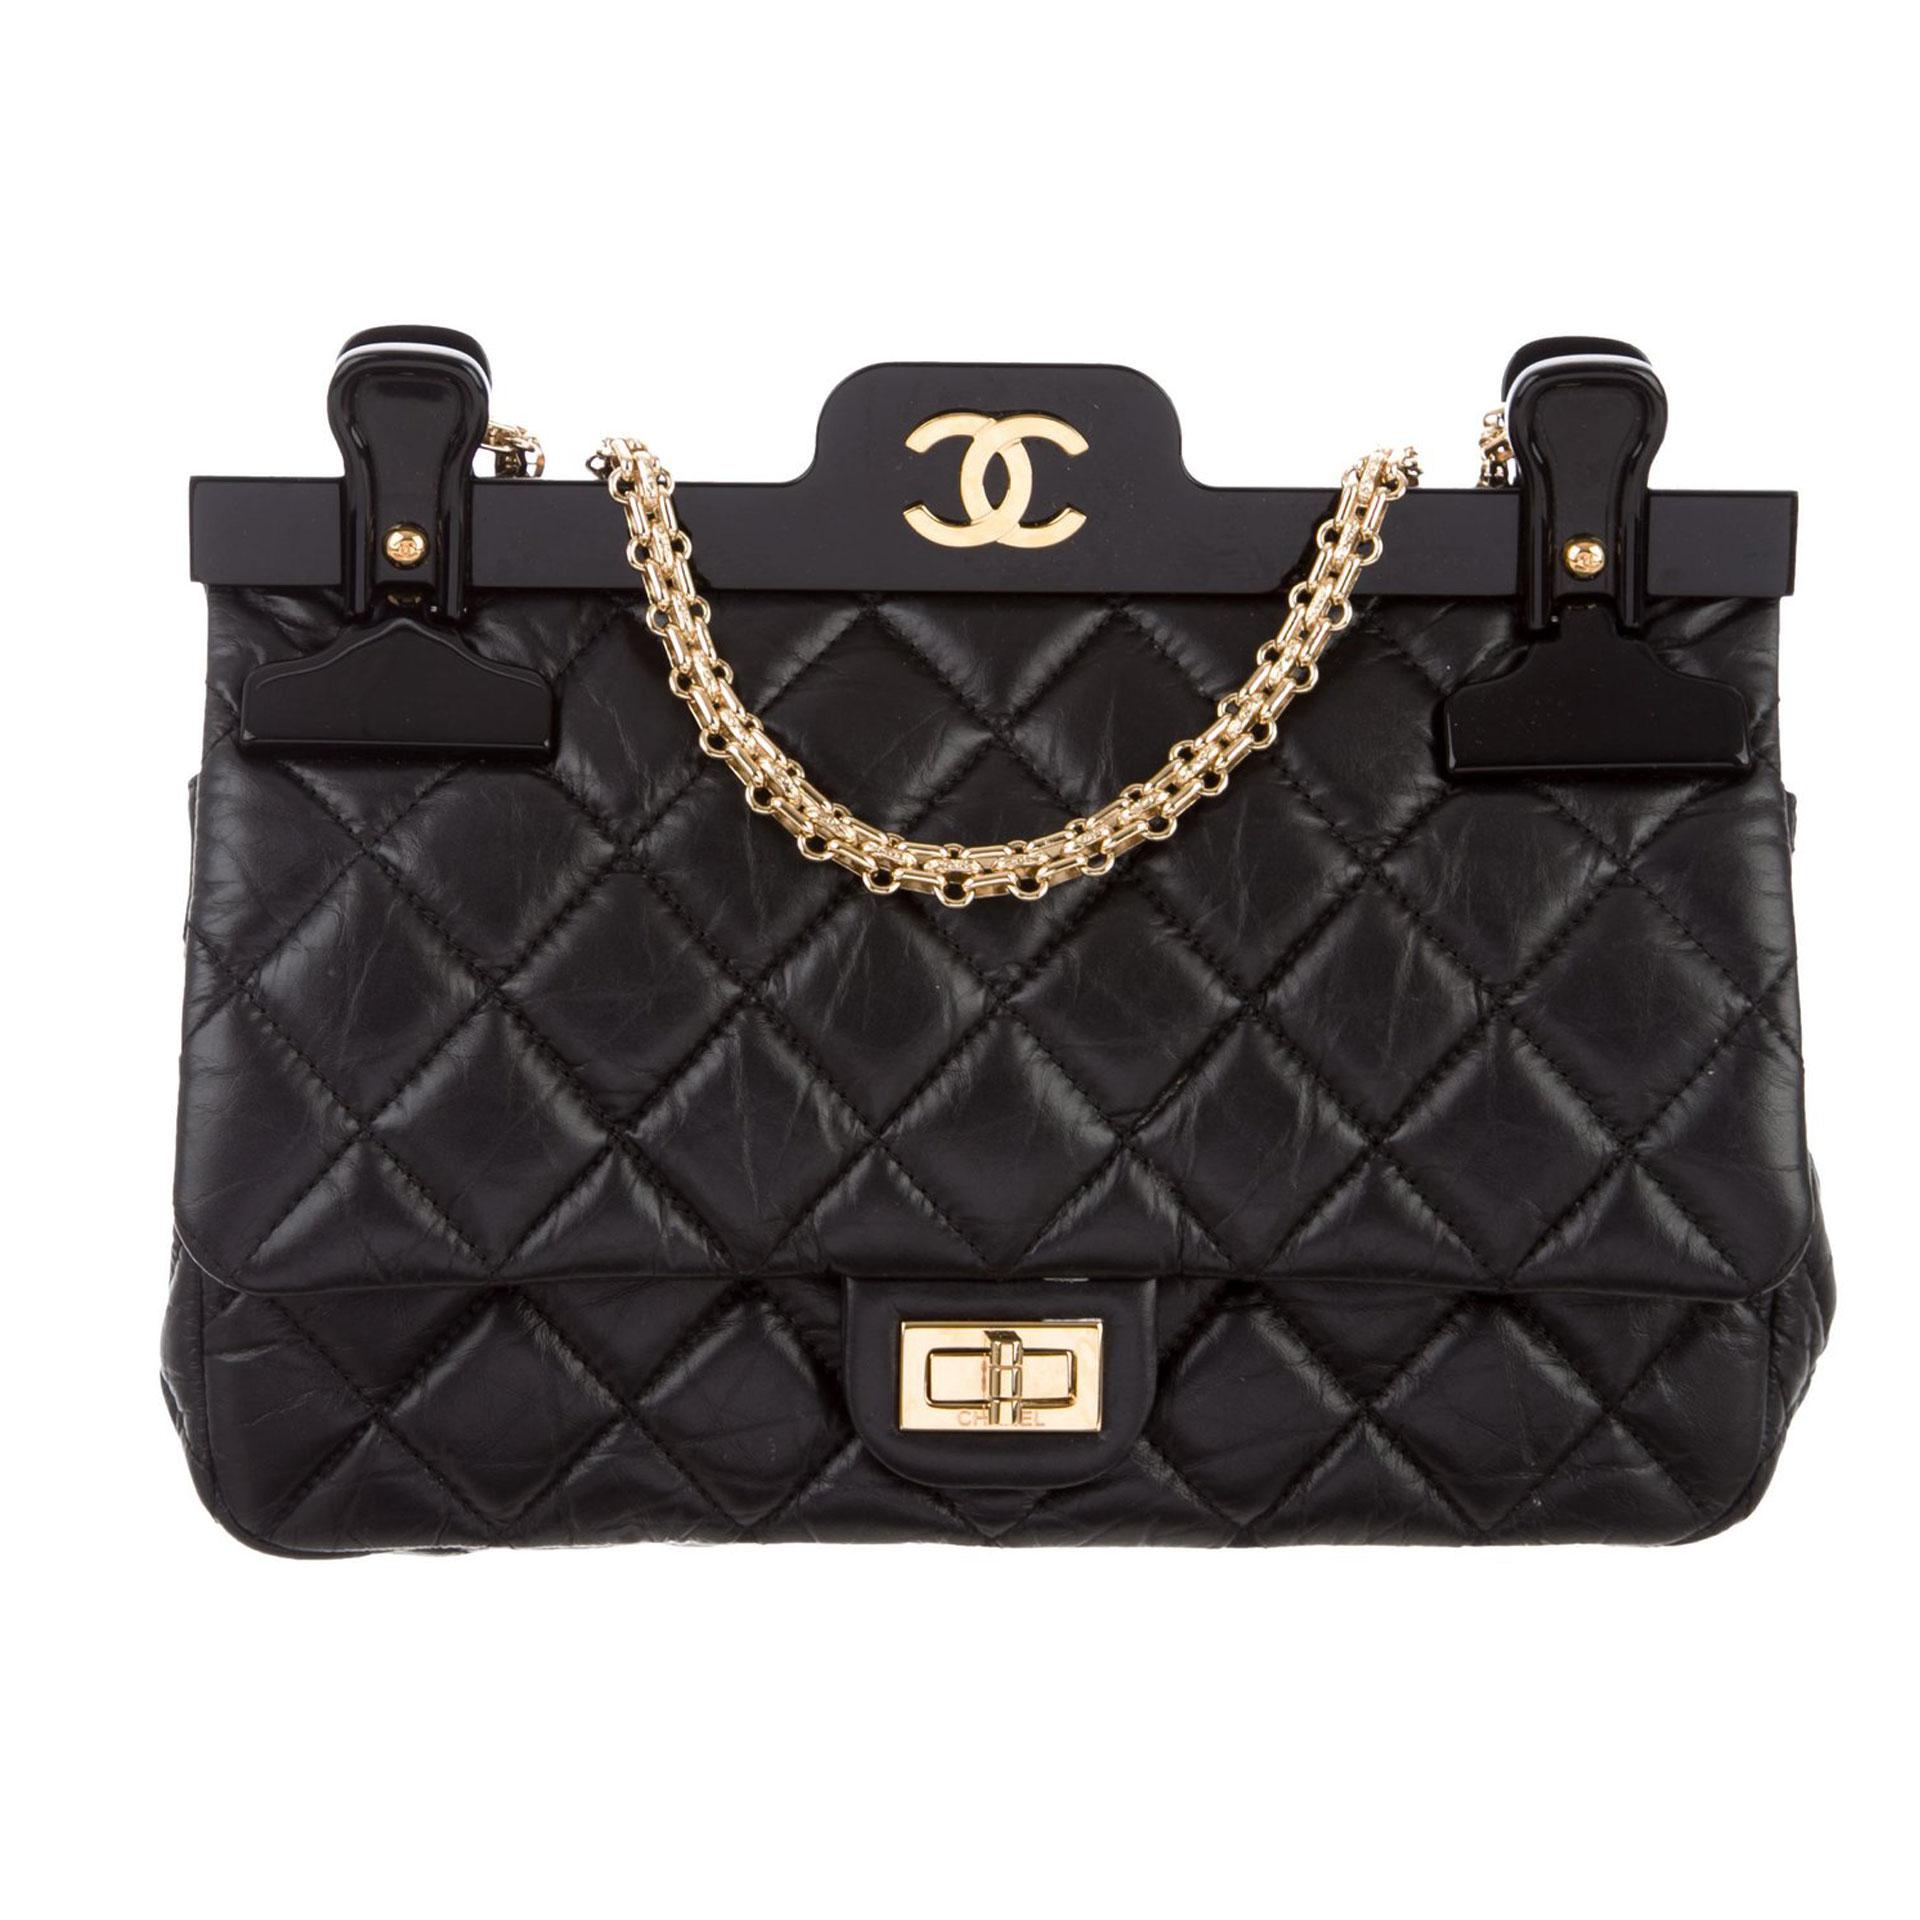 Chanel 2.55 Reissue Classic Flap Rare Hanger Large Limited Editiion